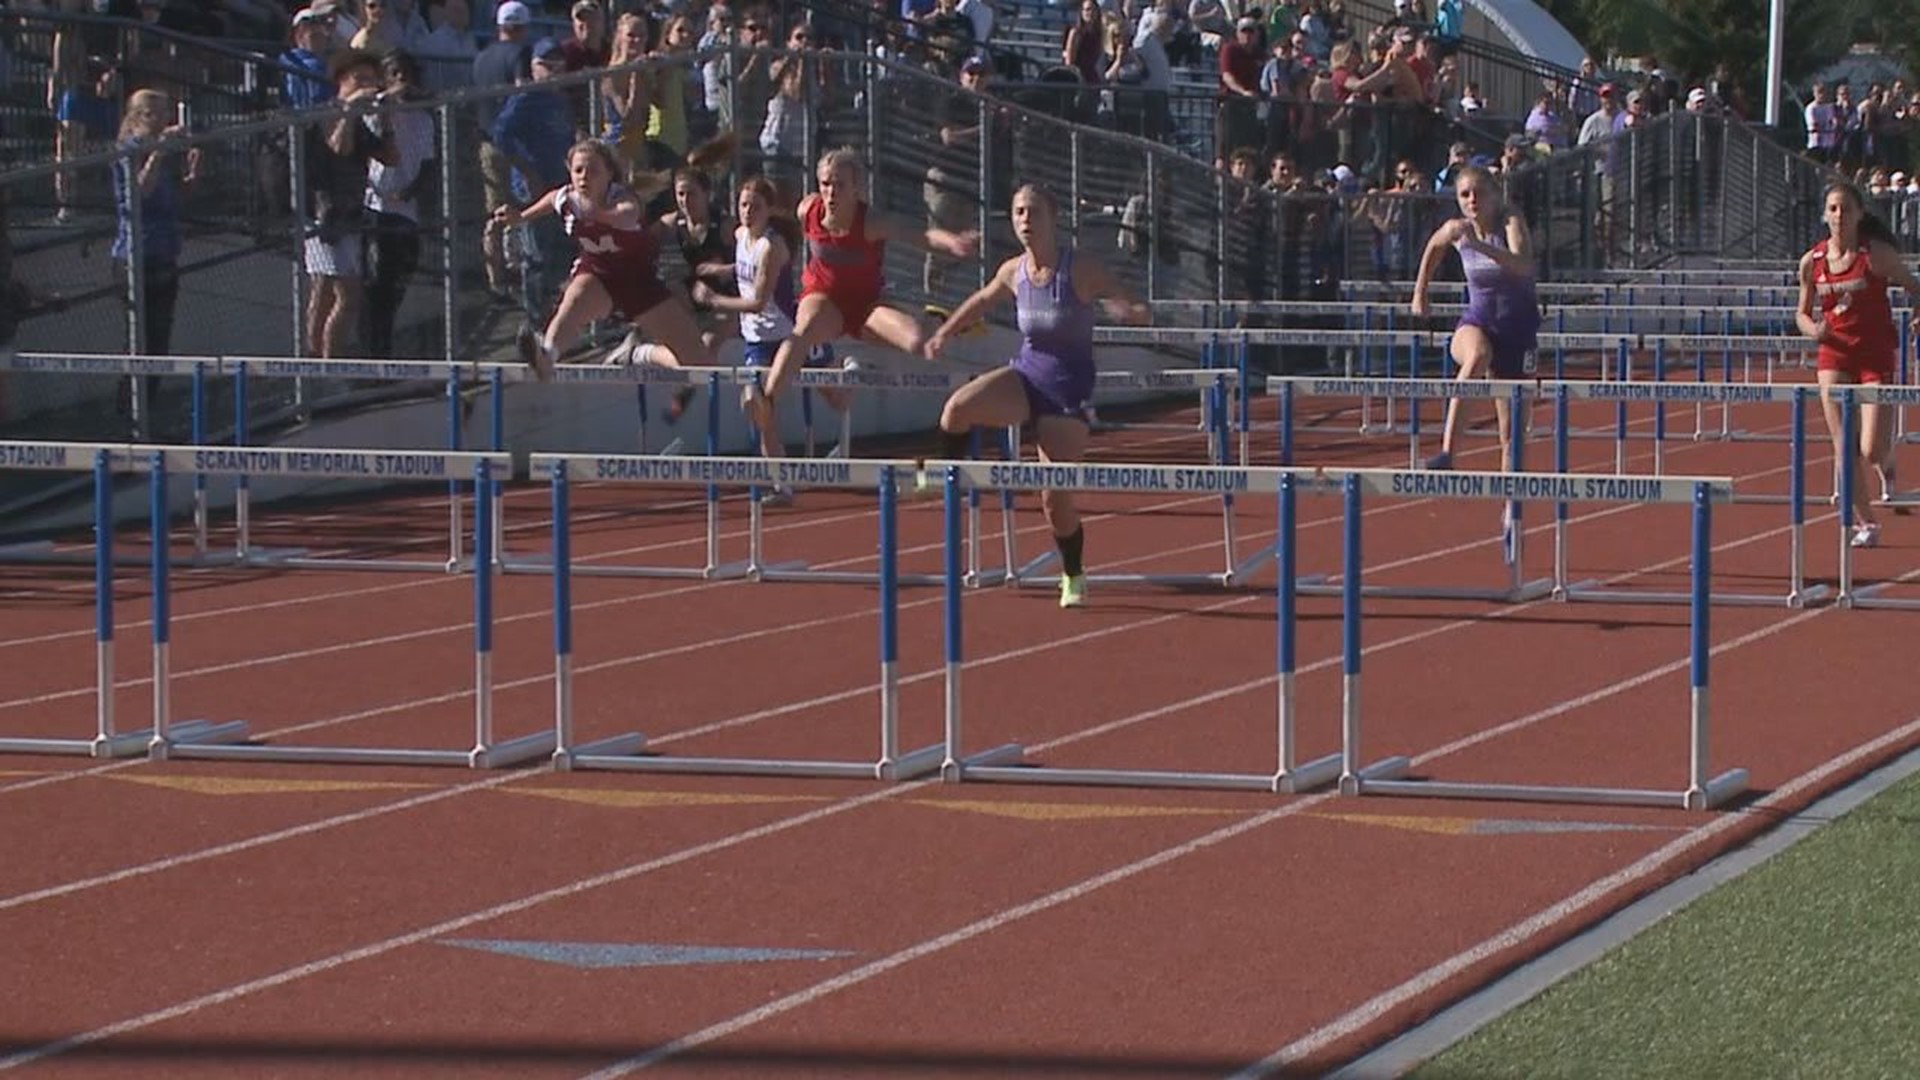 Perfect weather for the Bob spagna Track and Field Championships at Scranton High School